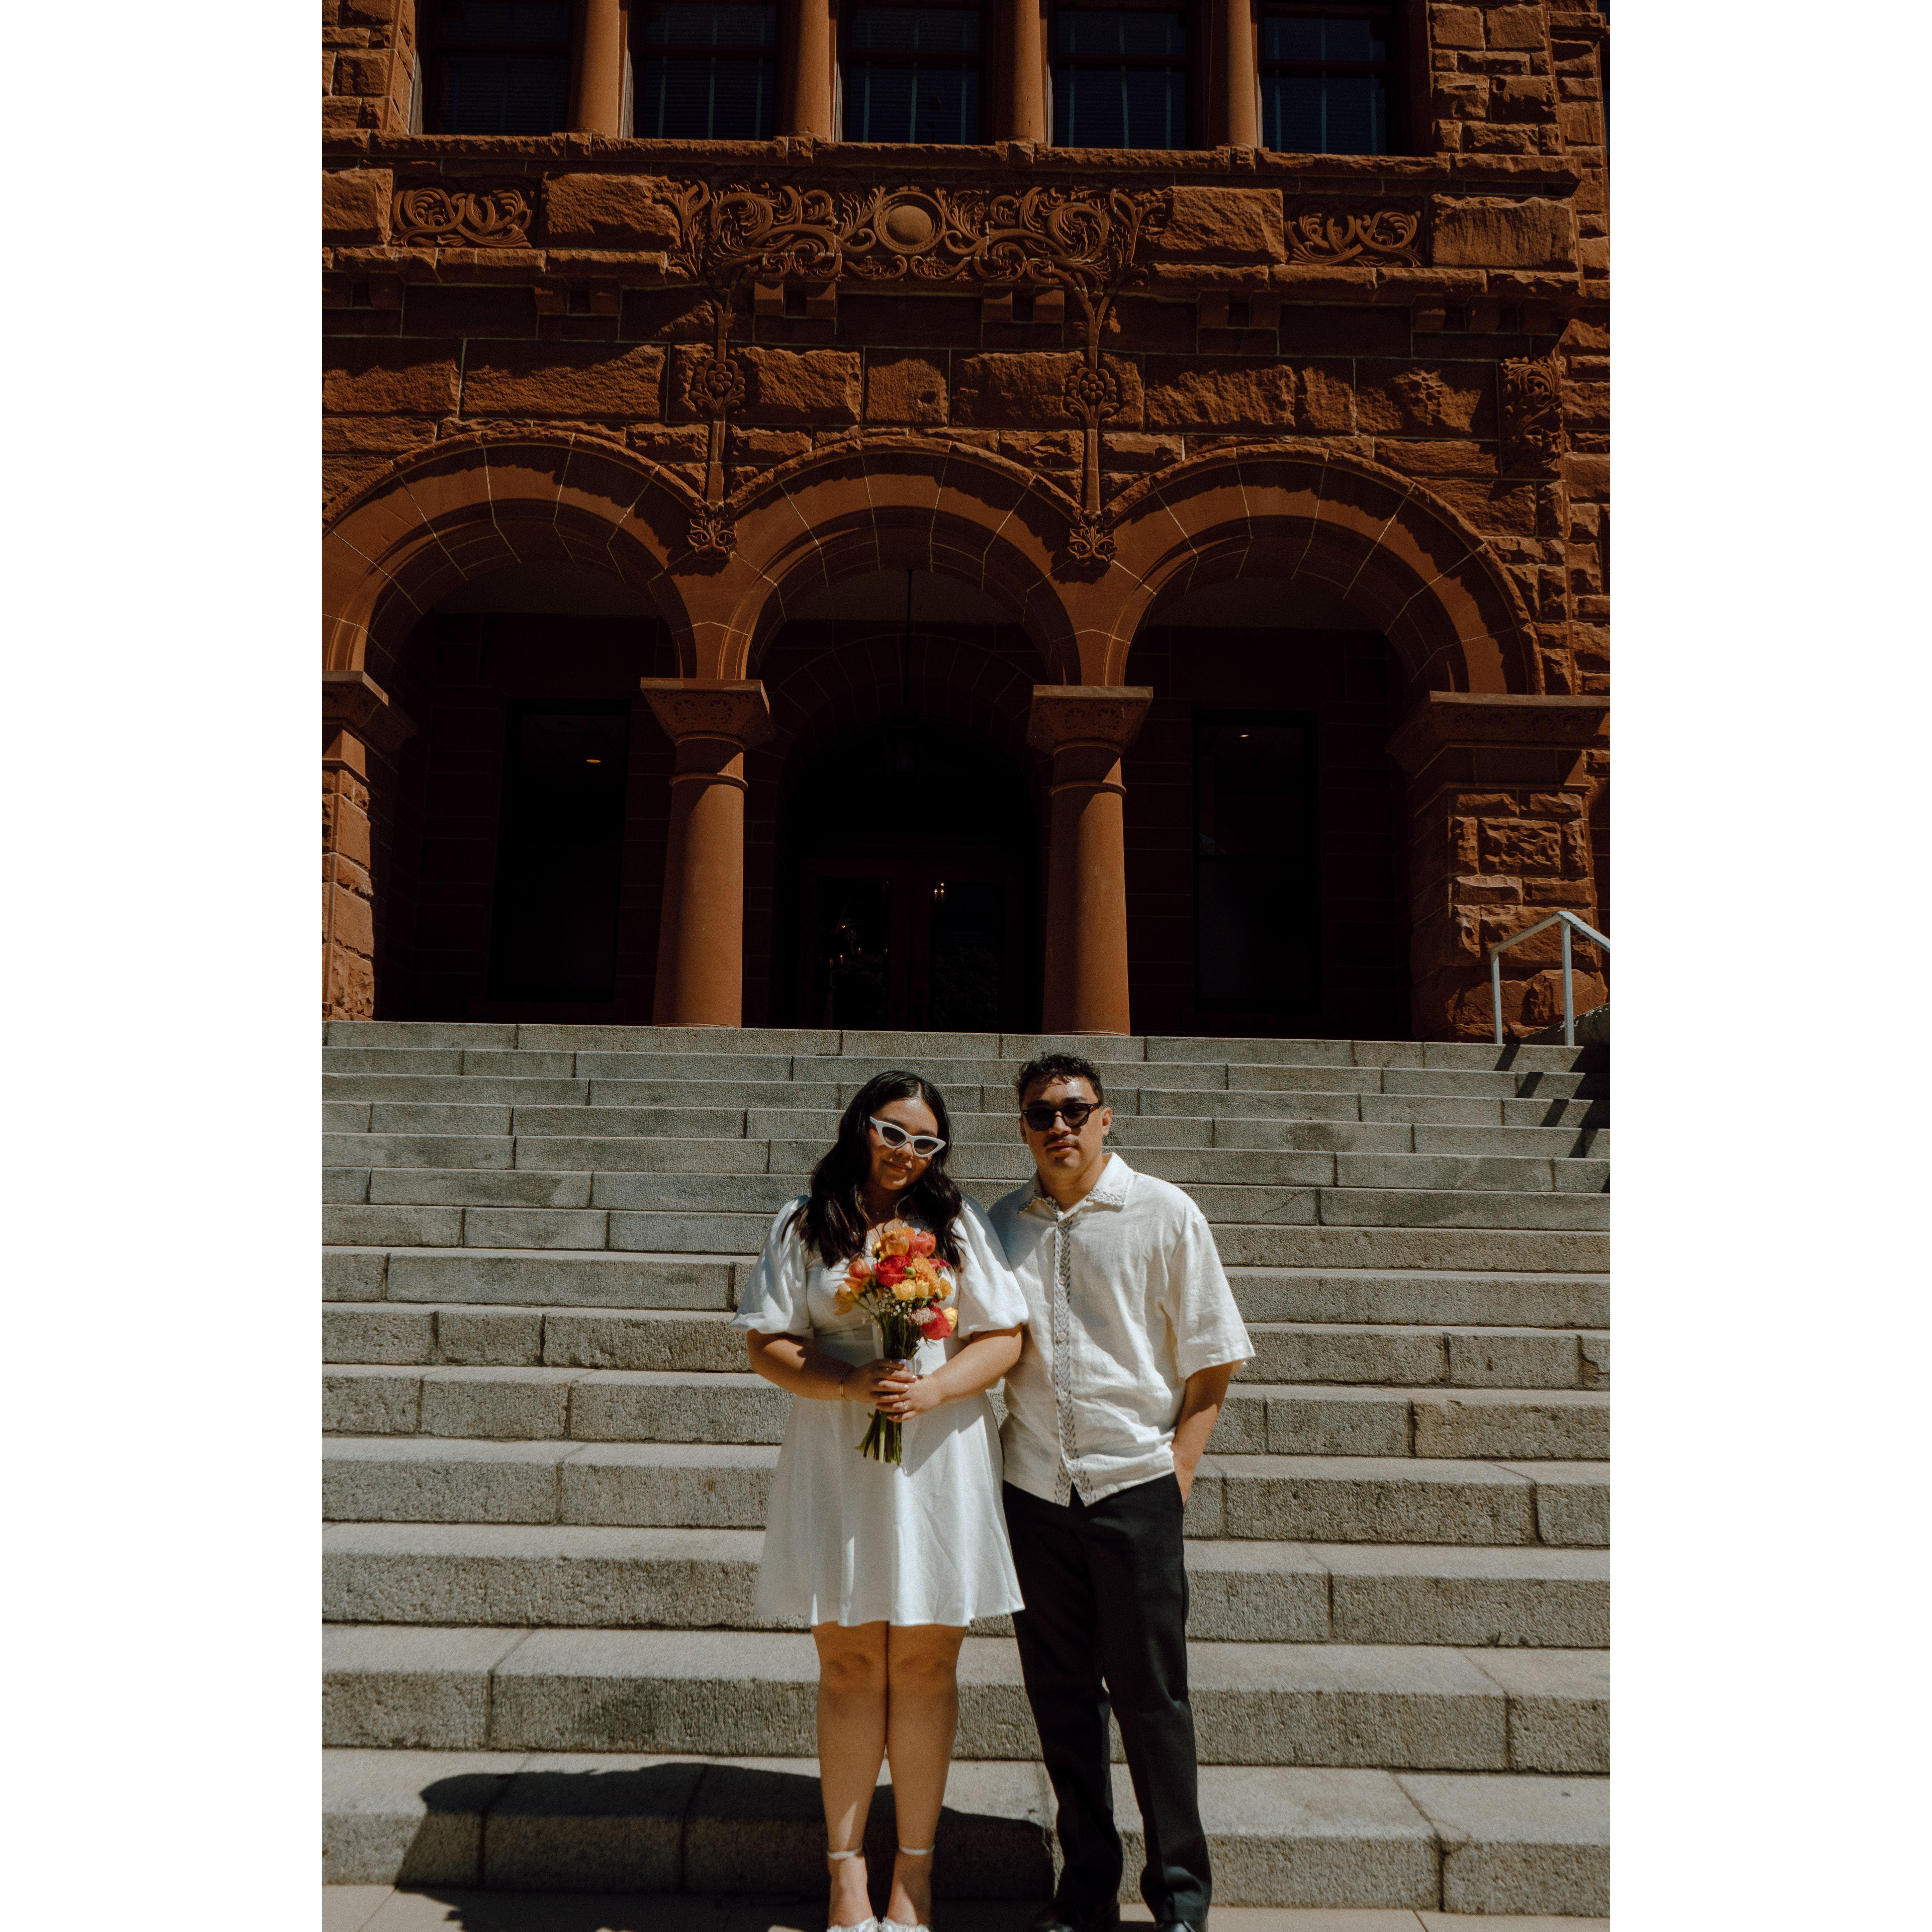 This is one of our favorite pictures from our courthouse wedding!